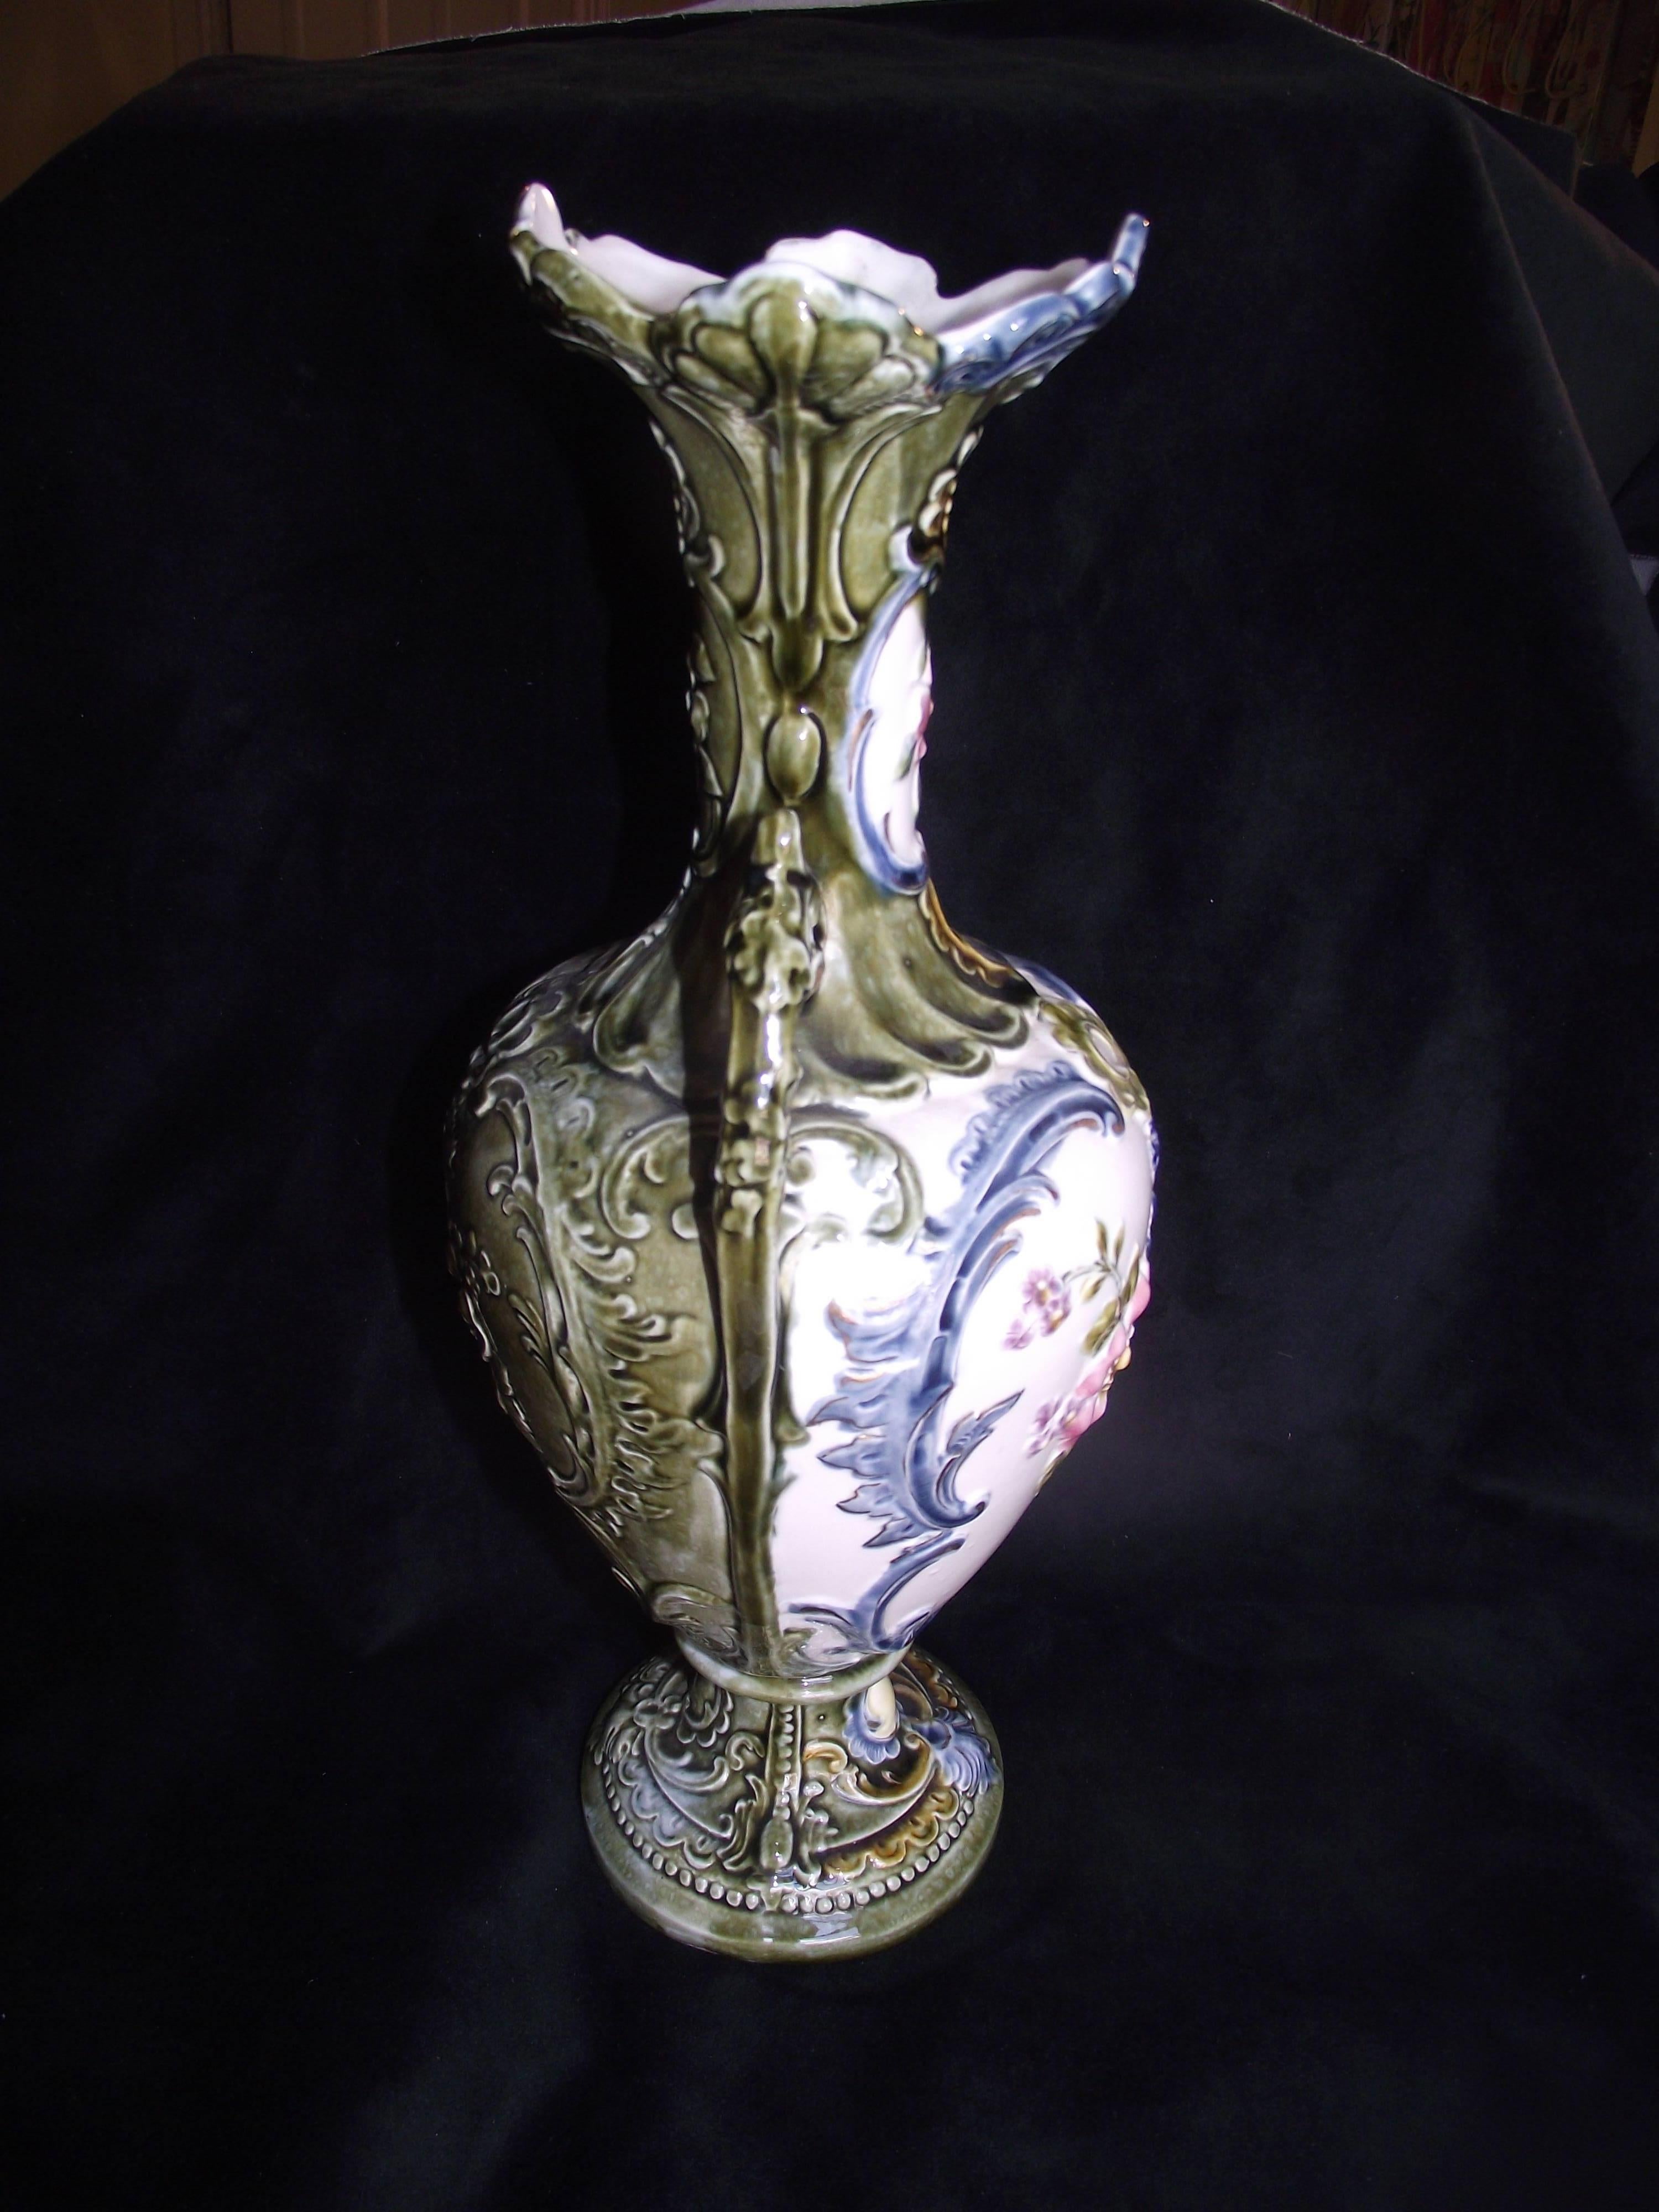 Nice sized Majolica two handled vase. Beautifully decorated. No chips, cracks or crazing to the glaze. It looks to me to be Italian but cannot make out the mark.